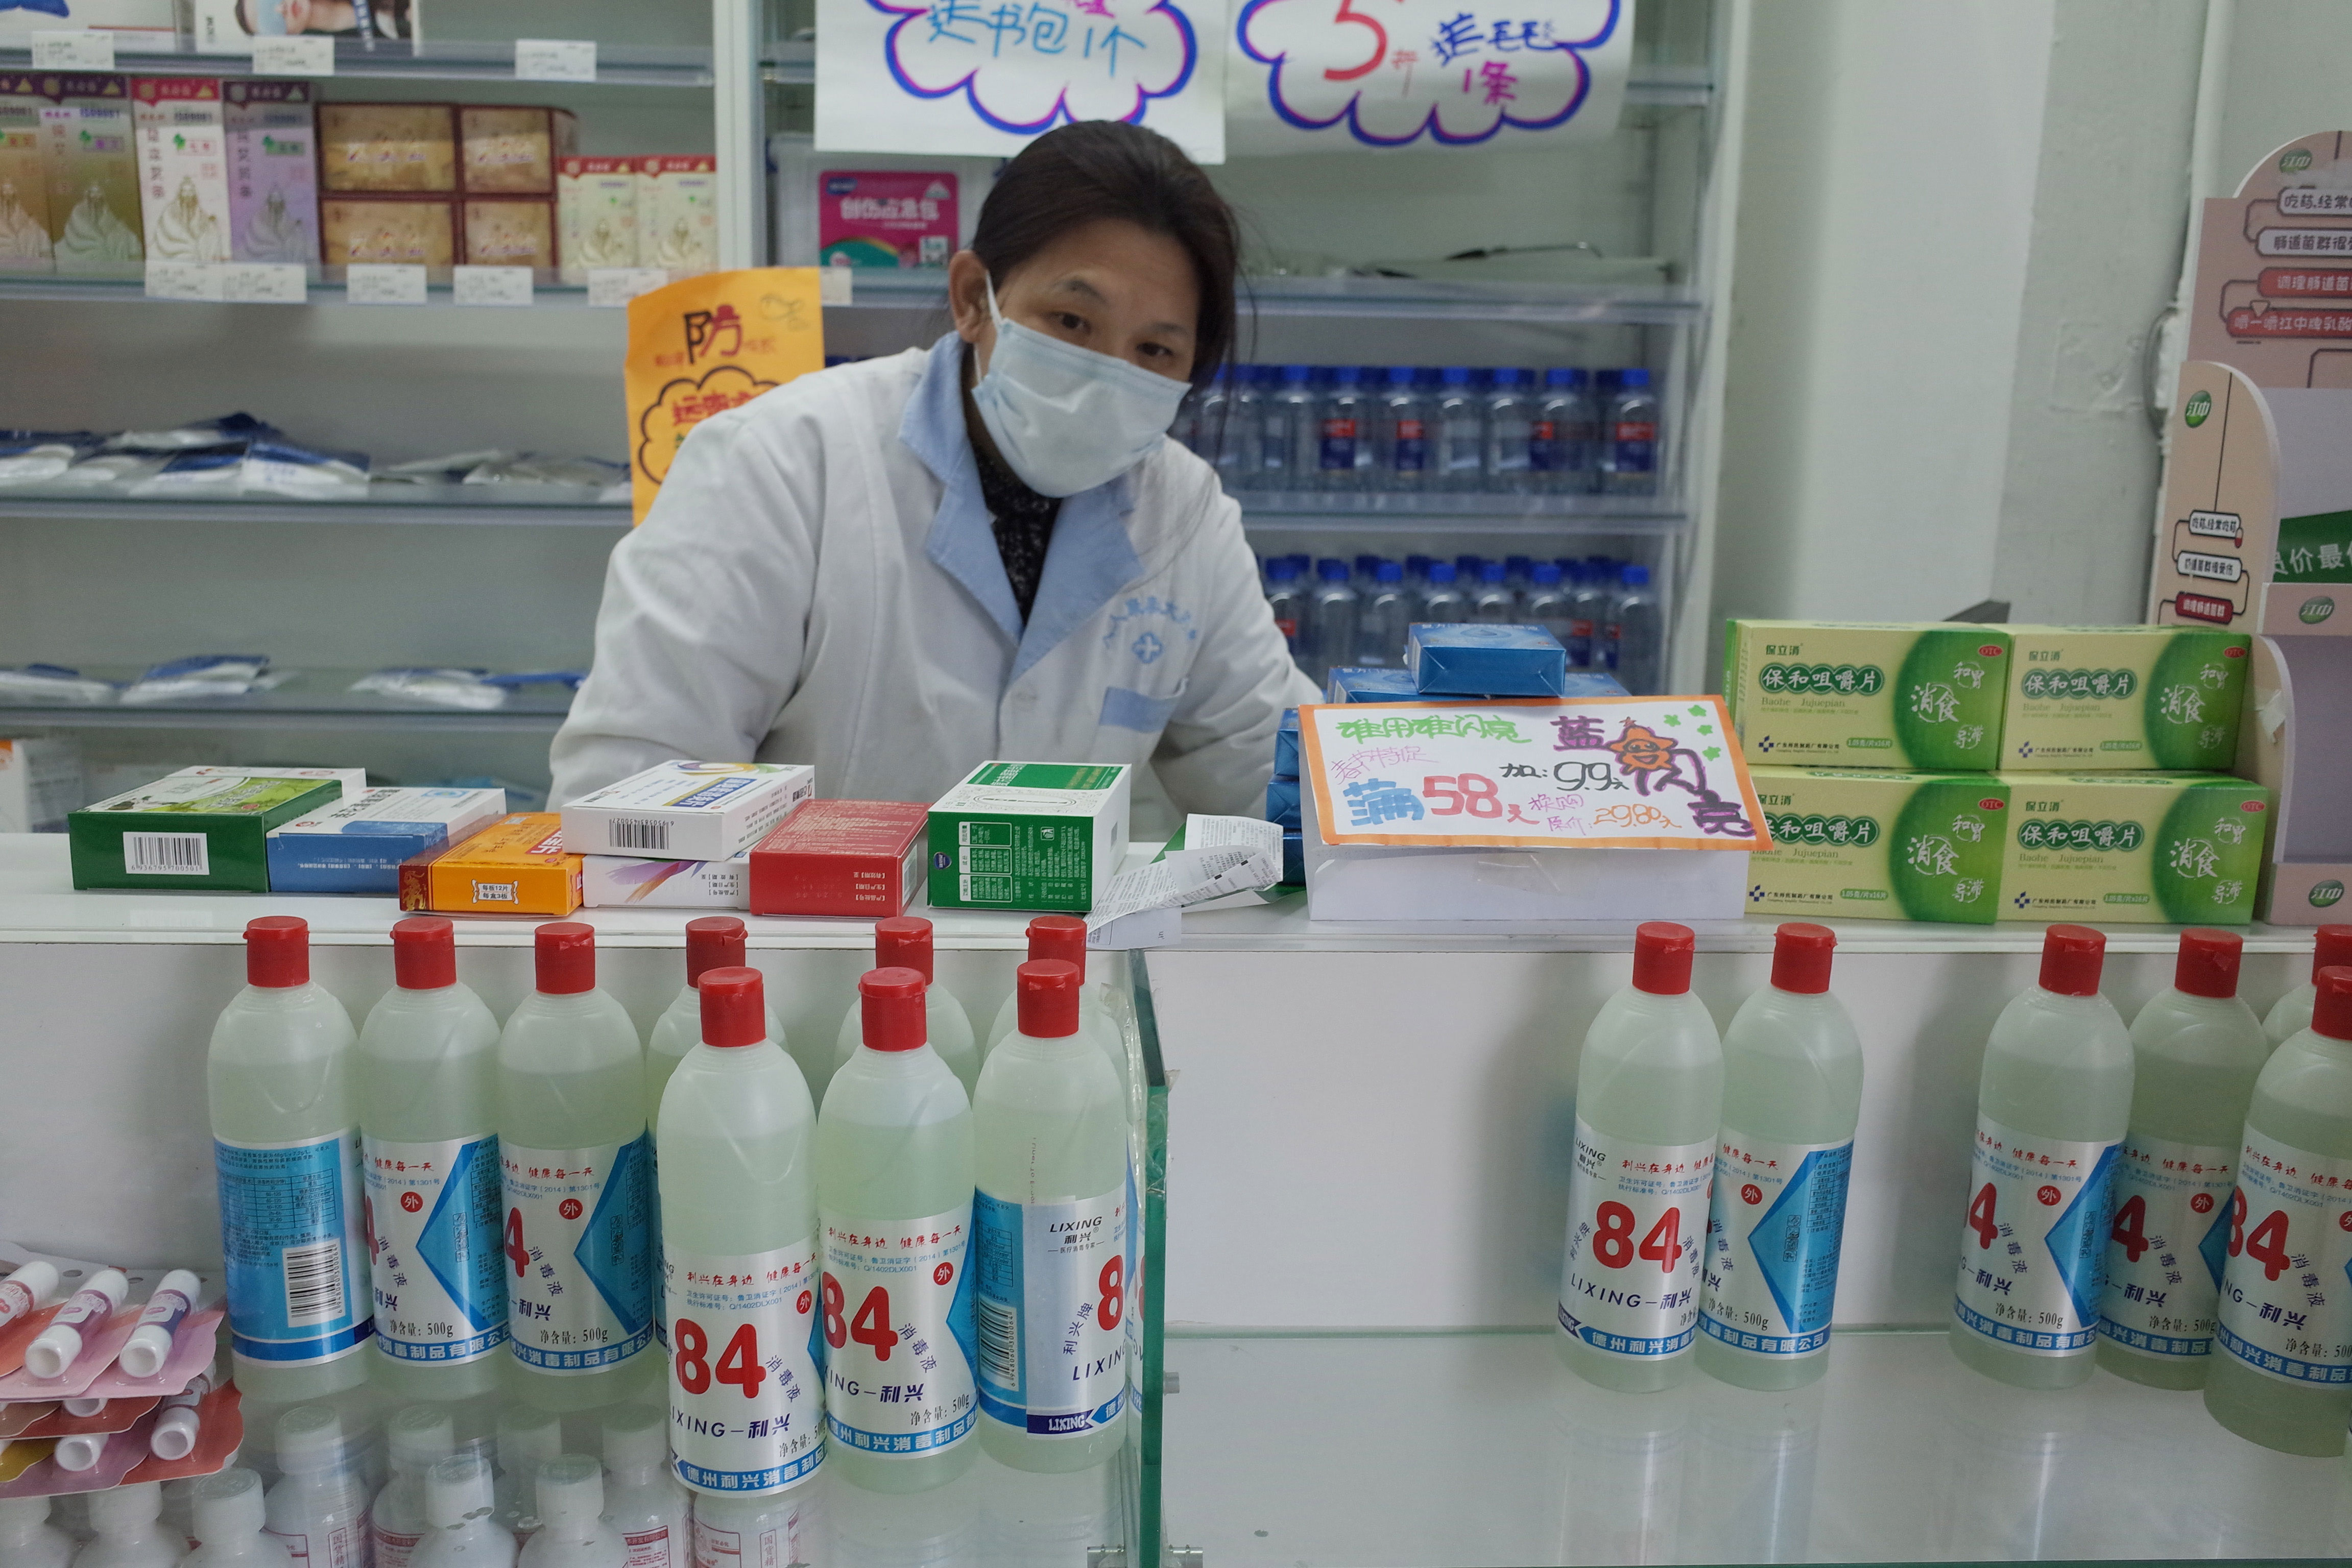 epa08158200 Disinfectant products sit on a shelf at a drug store in Beijing, China, 24 January 2020. The outbreak of coronavirus has so far claimed 26 lives and infected more than 800 others, according to media reports. The virus has so far spread to the USA, Thailand, South Korea, Japan, Singapore and Taiwan.  EPA/WU HONG